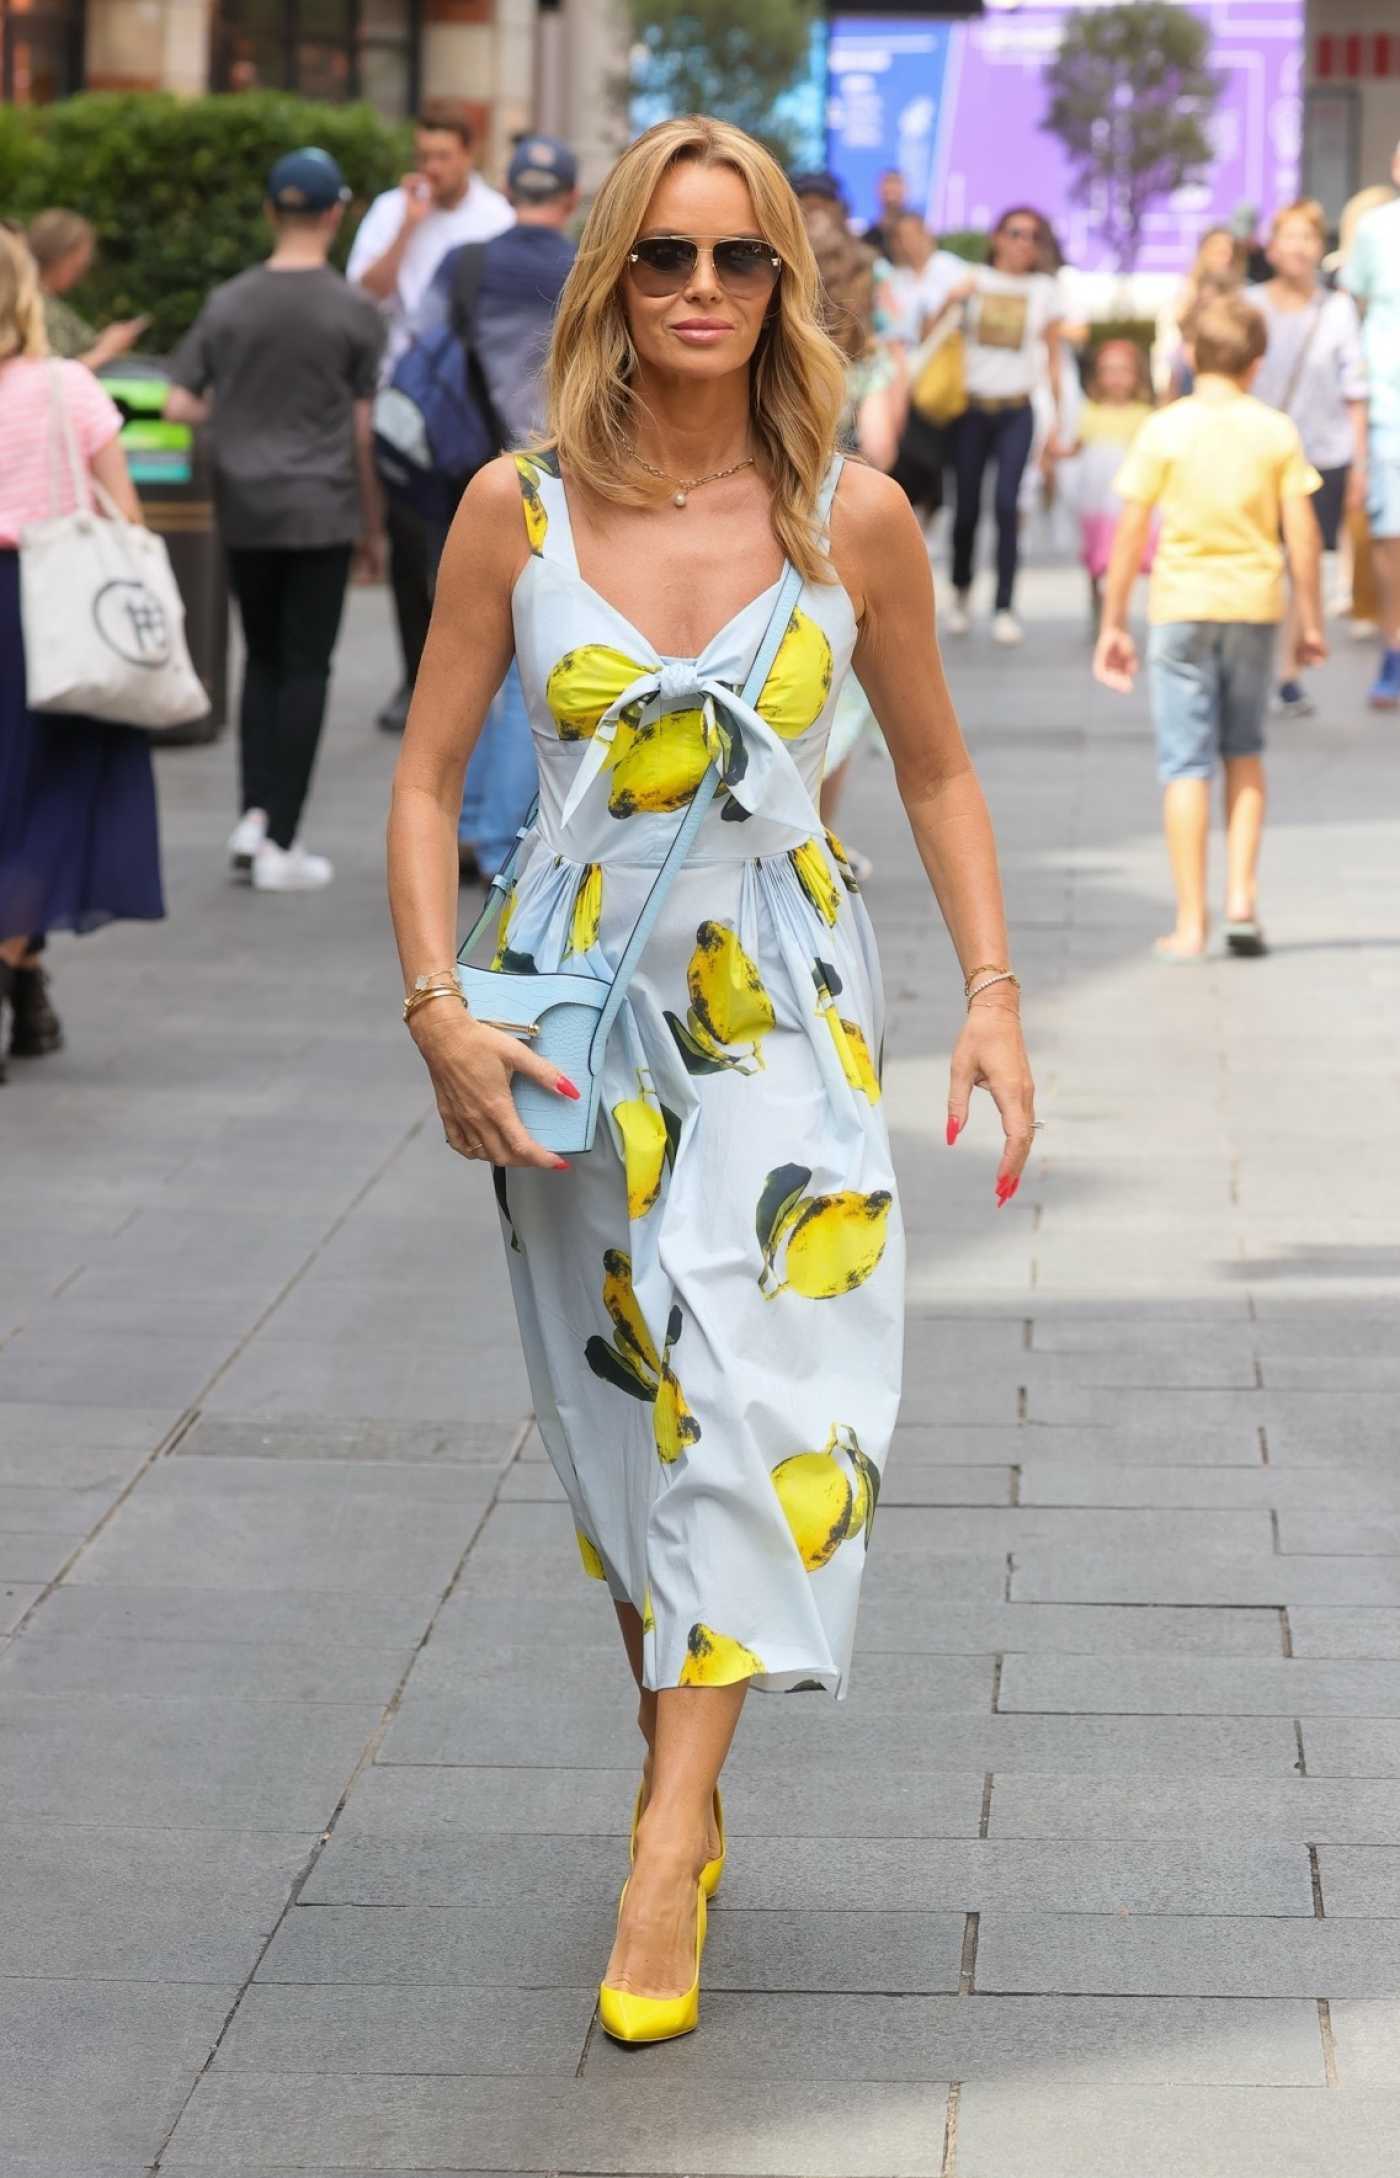 Amanda Holden in a Fruit Print Dress Heads to Buckingham Palace in London 07/14/2022